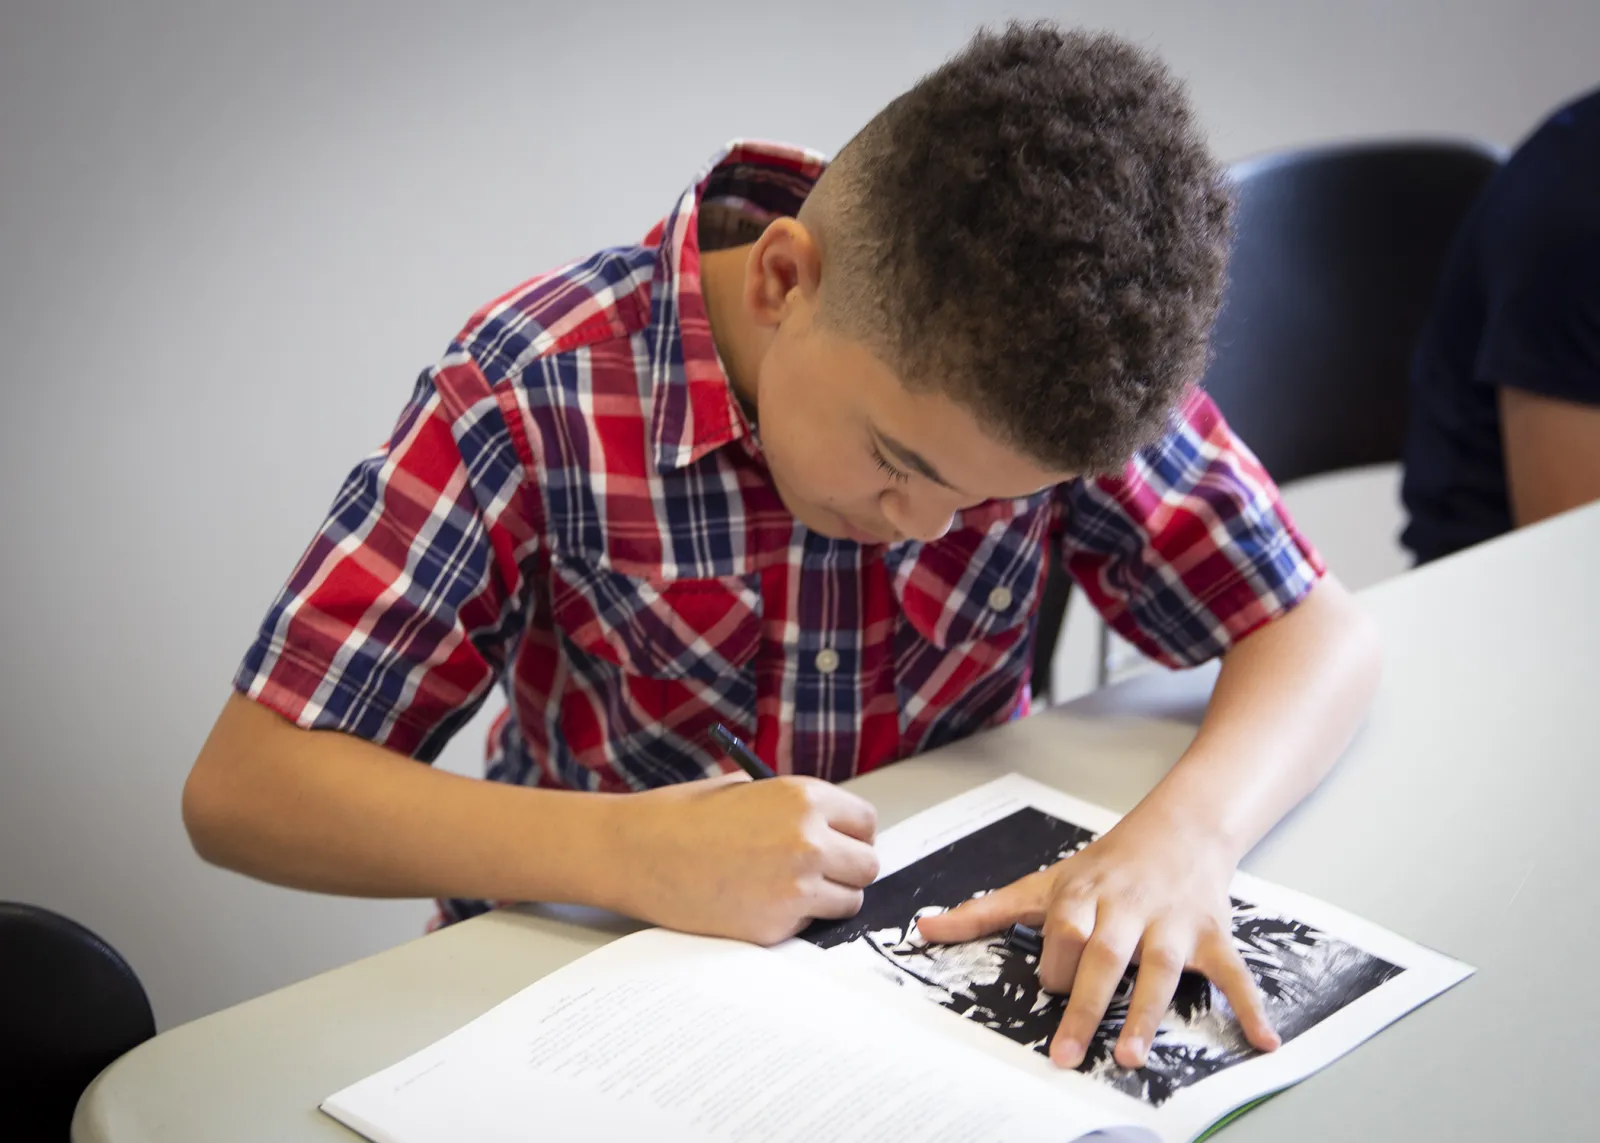 A school-aged, light-skinned Black male is bent over a copy of Kids in Print magazine and is using a black pen to sign his copy.